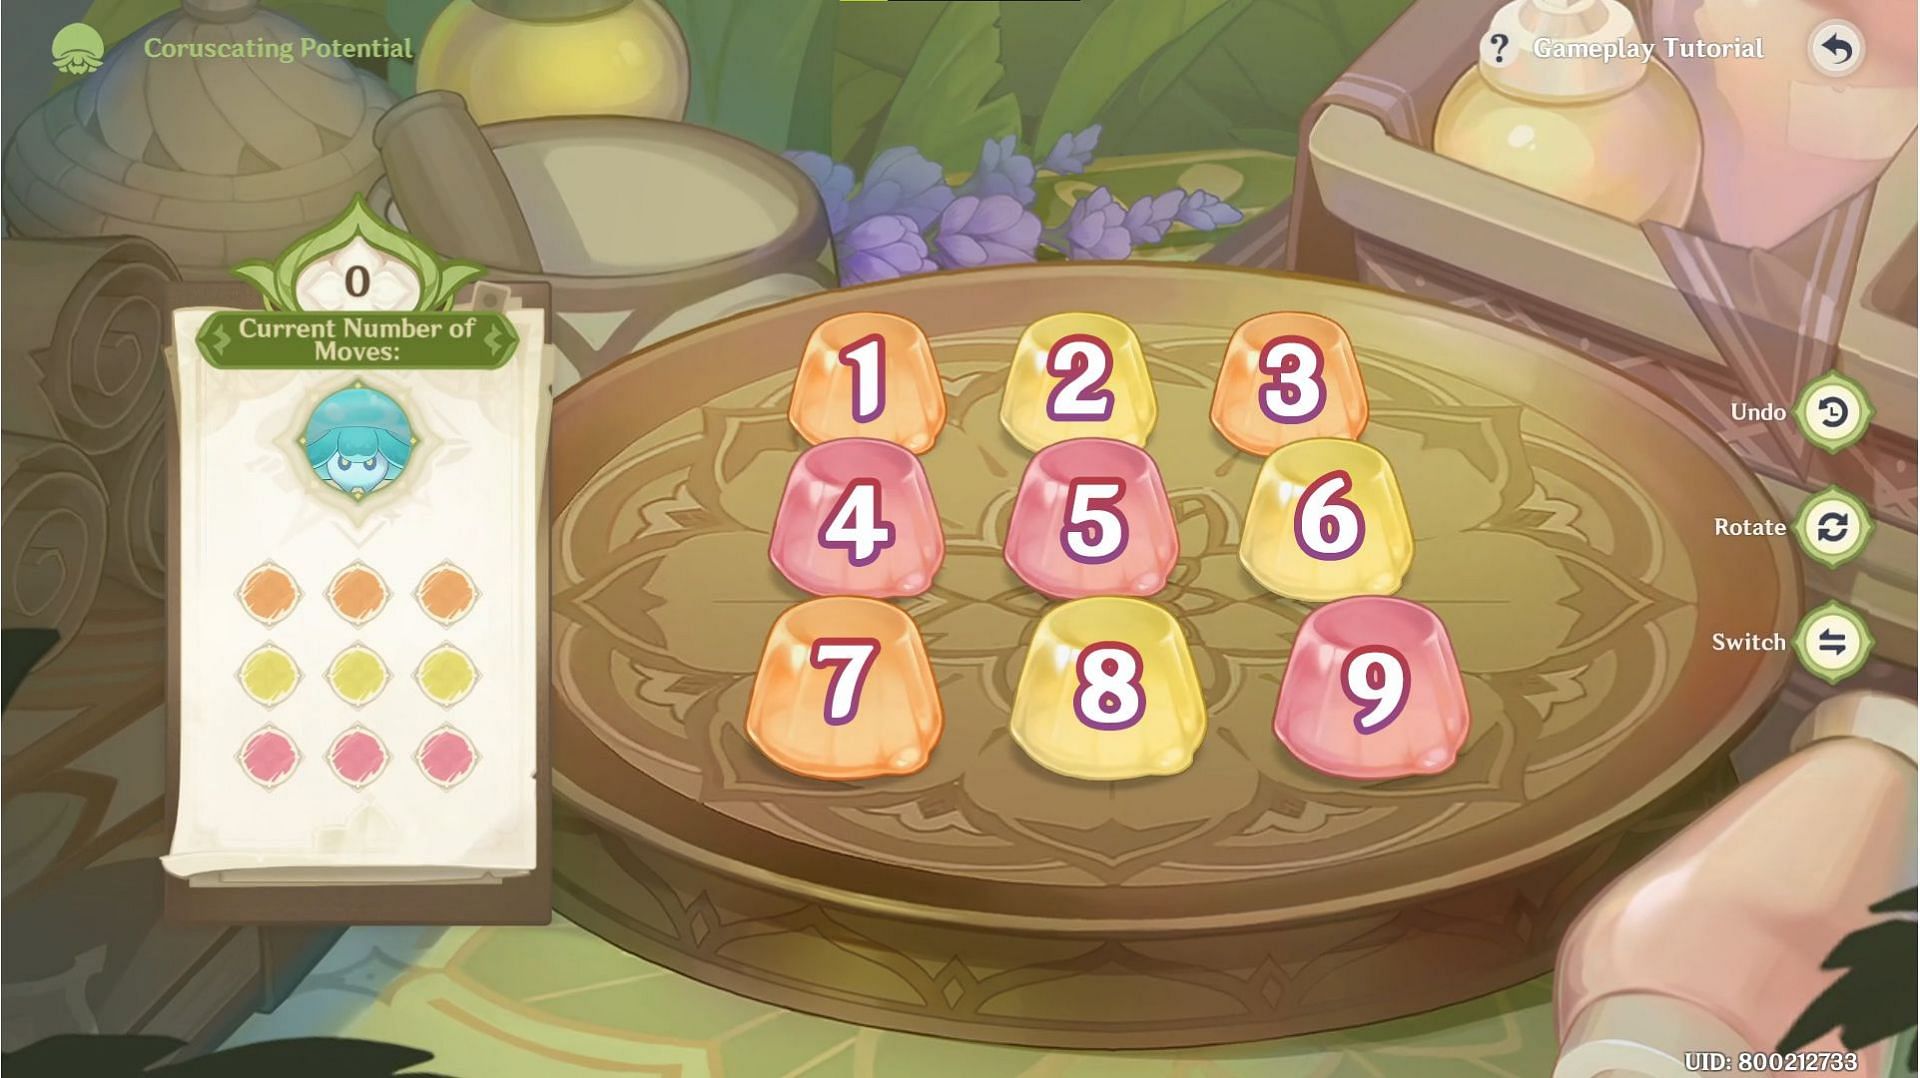 Floral Jelly puzzle for Floating Hydro Fungus (Image via HoYoverse)